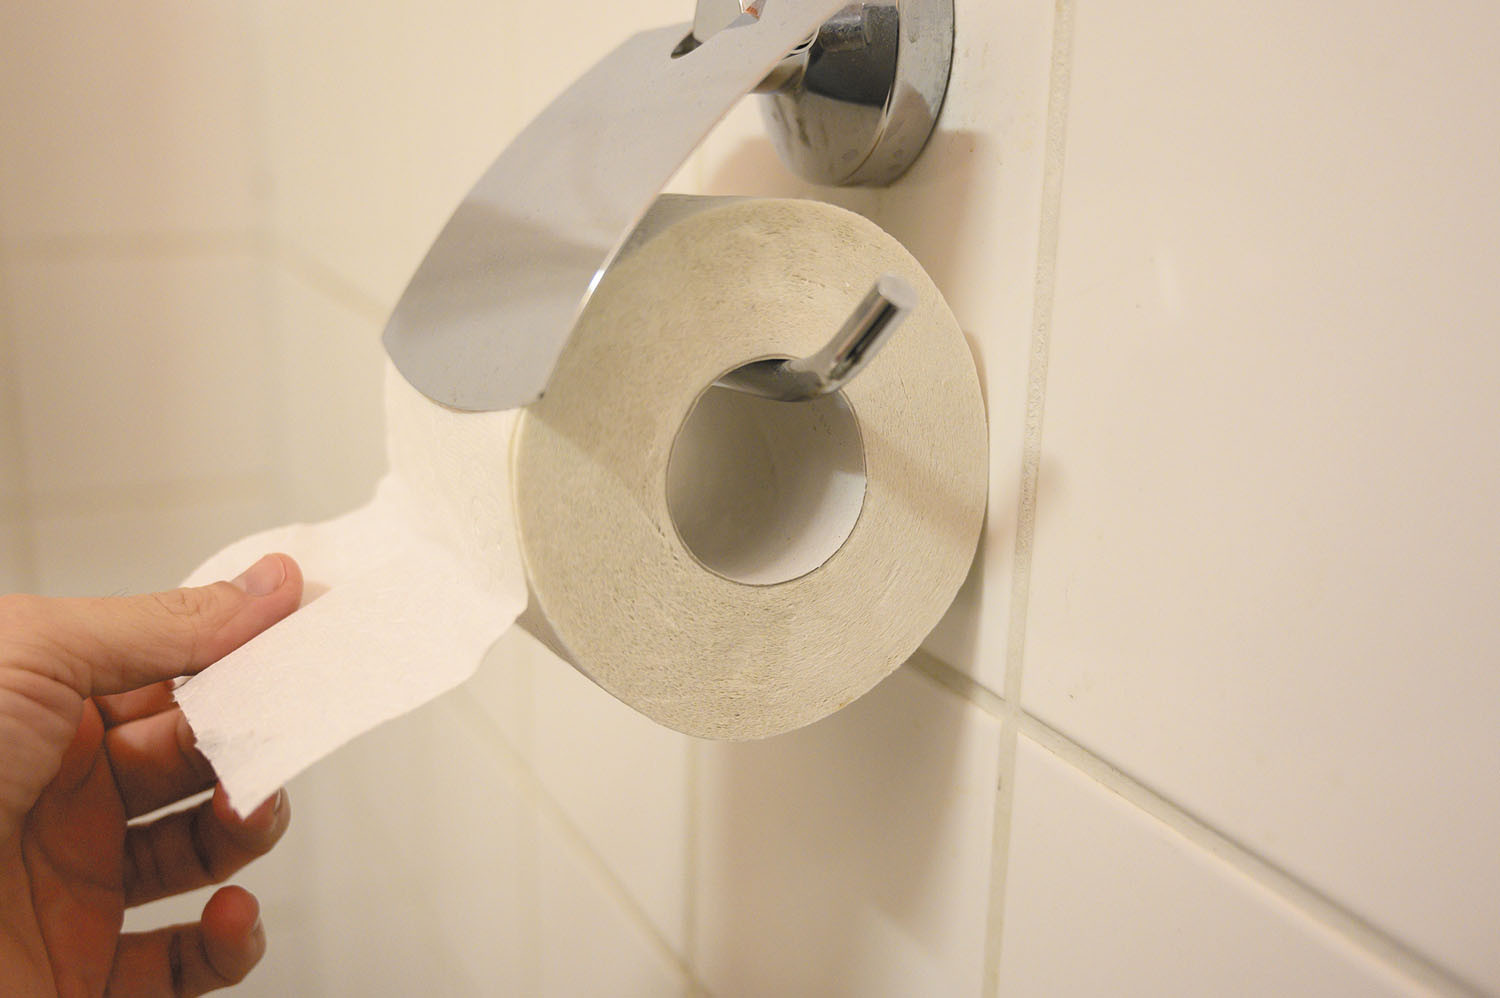 close-up photo of a roll of toilet paper with a hand reaching for it